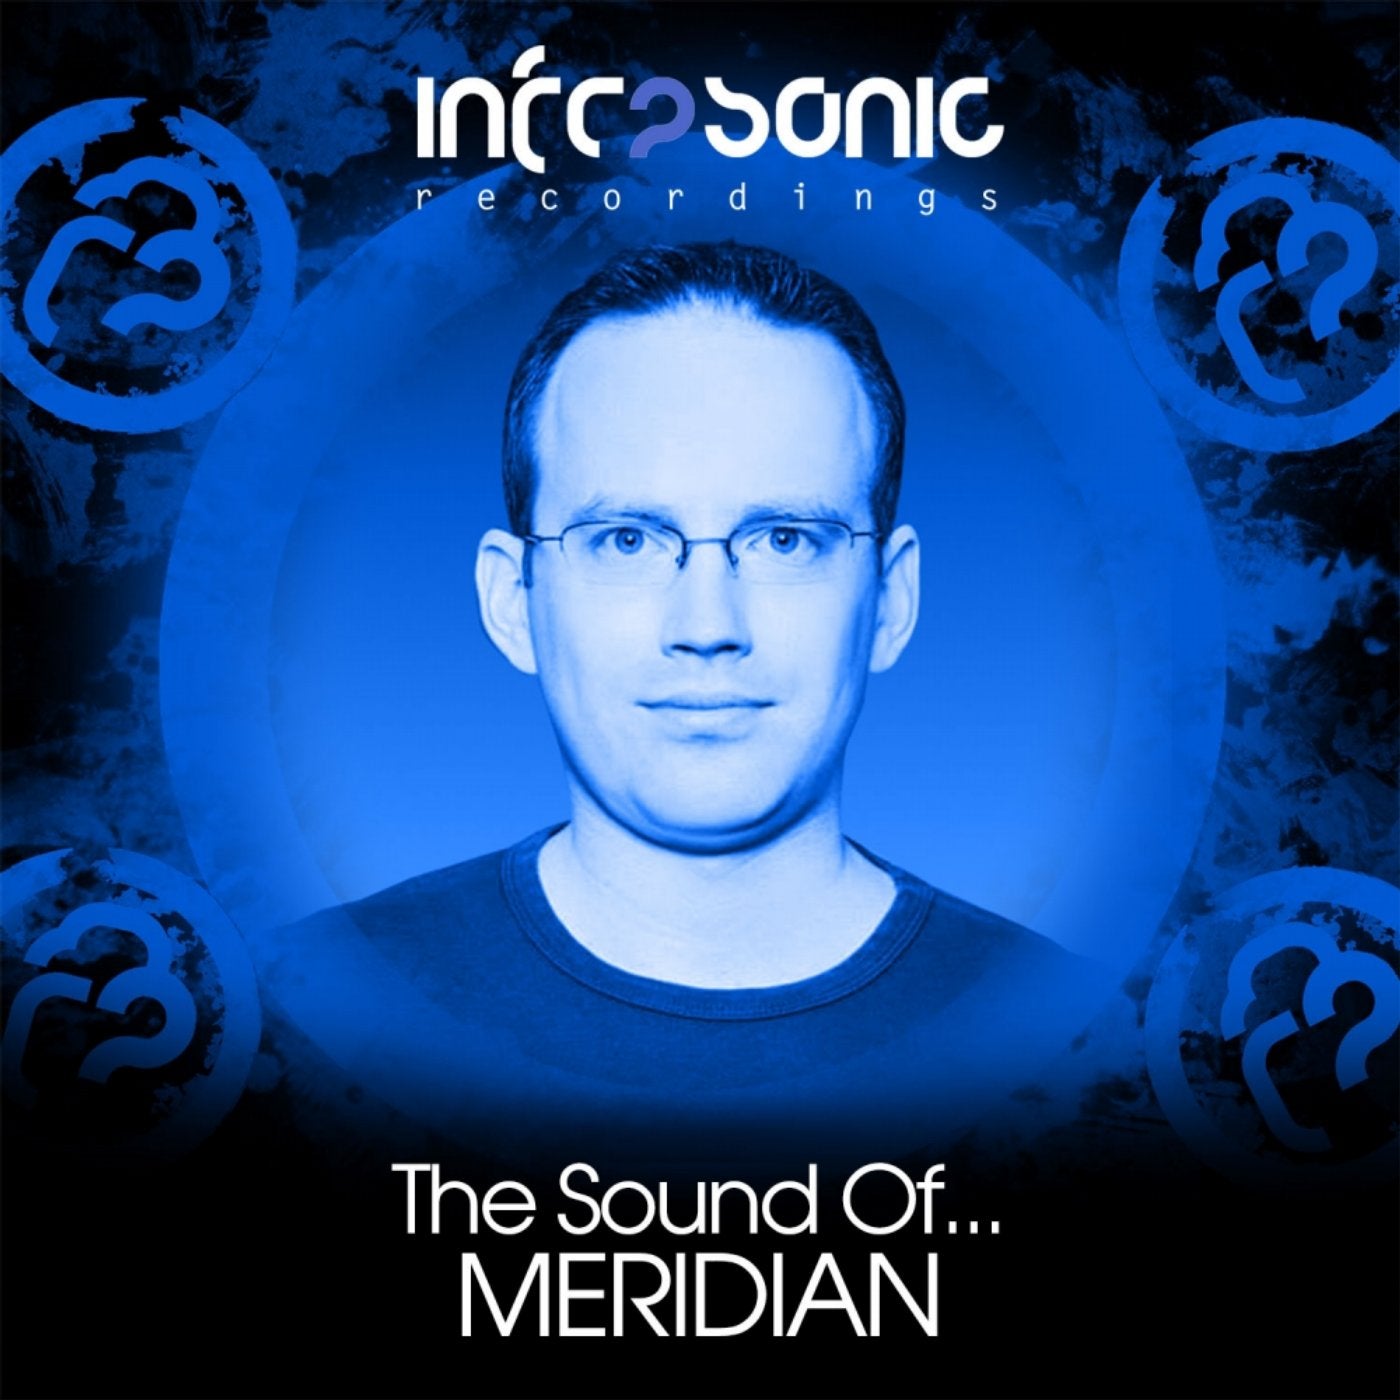 The Sound Of: Meridian